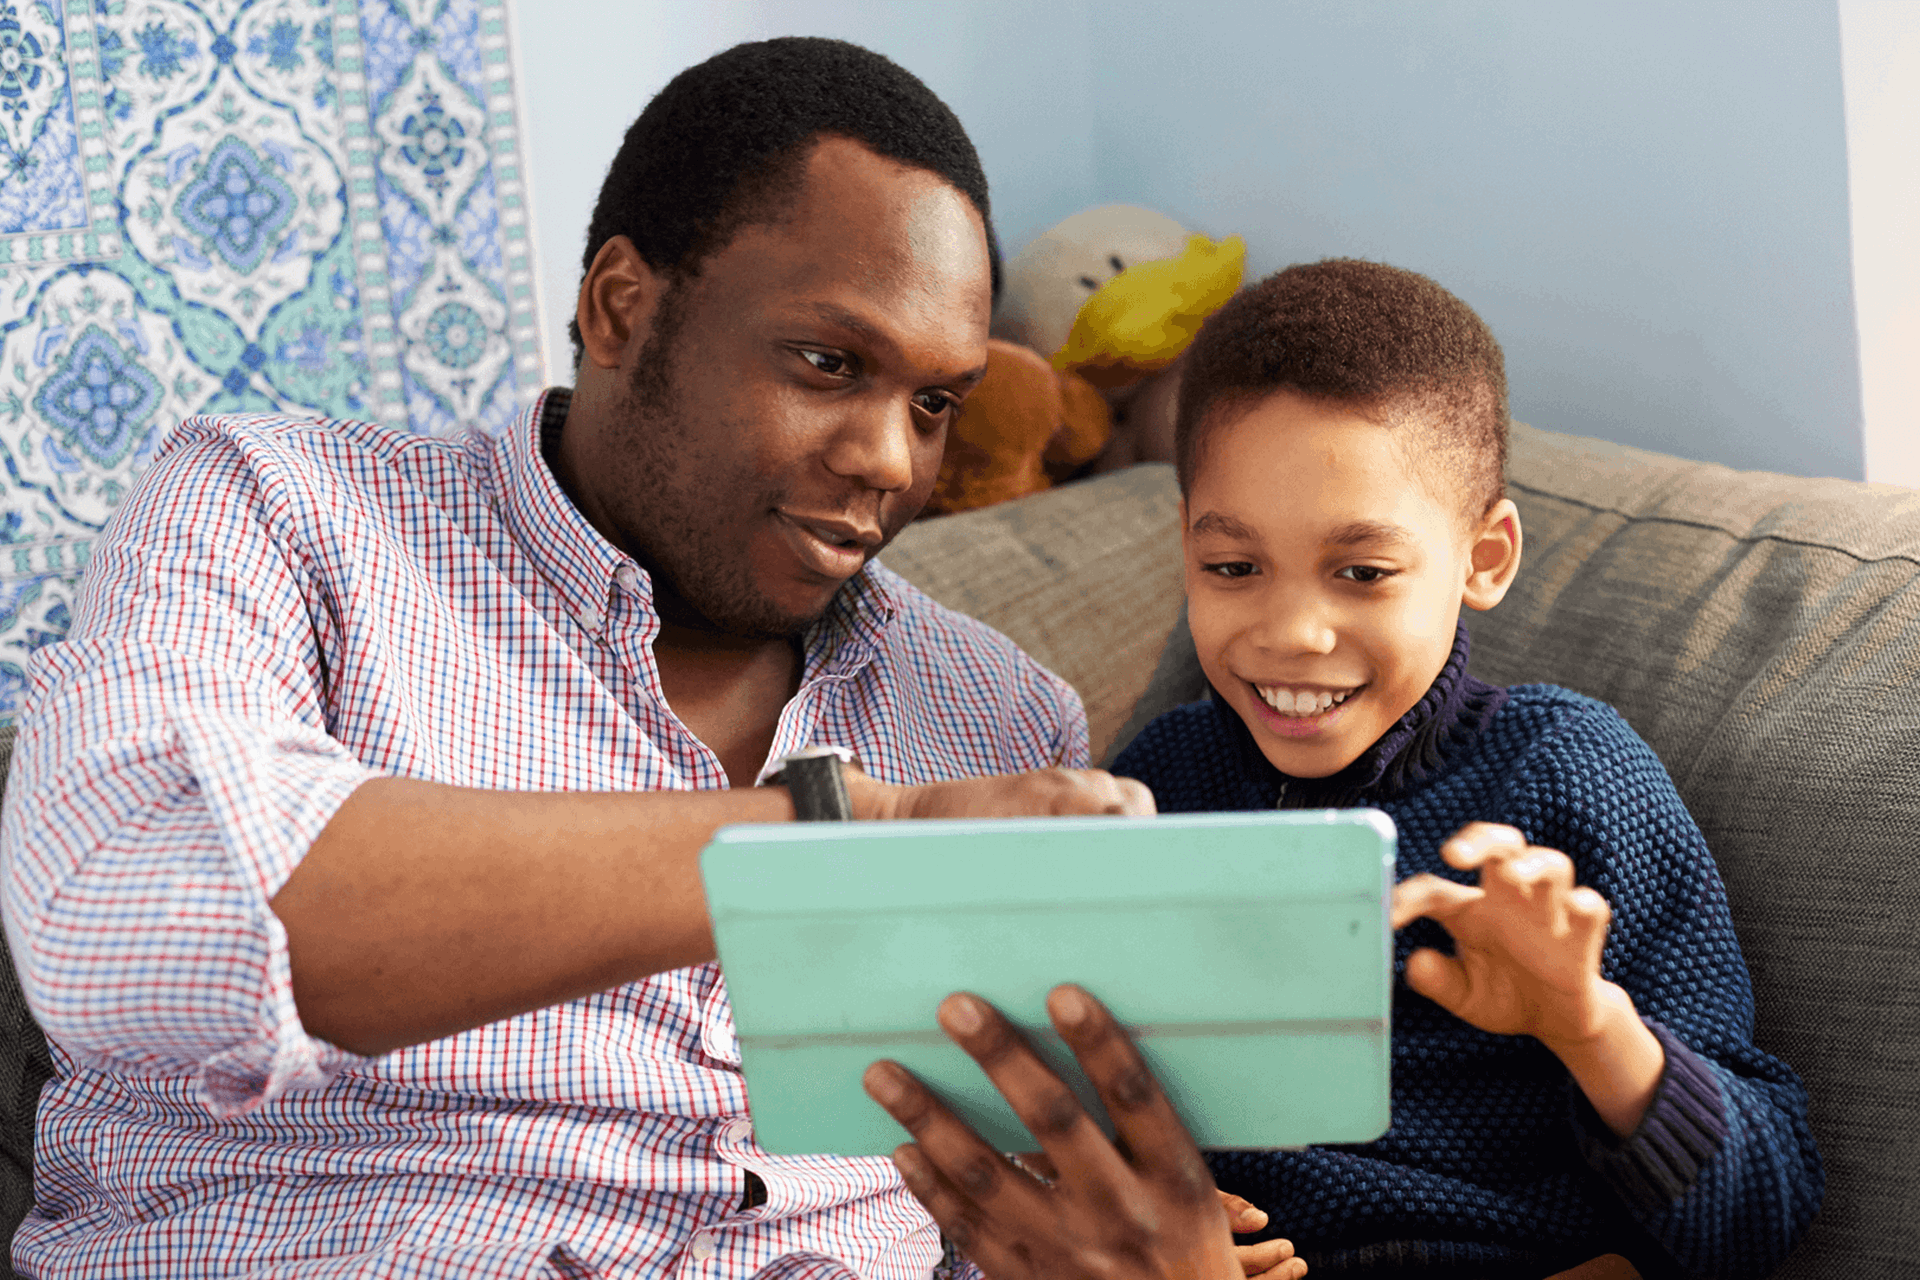 A father and son using a tablet together on the sofa smiling